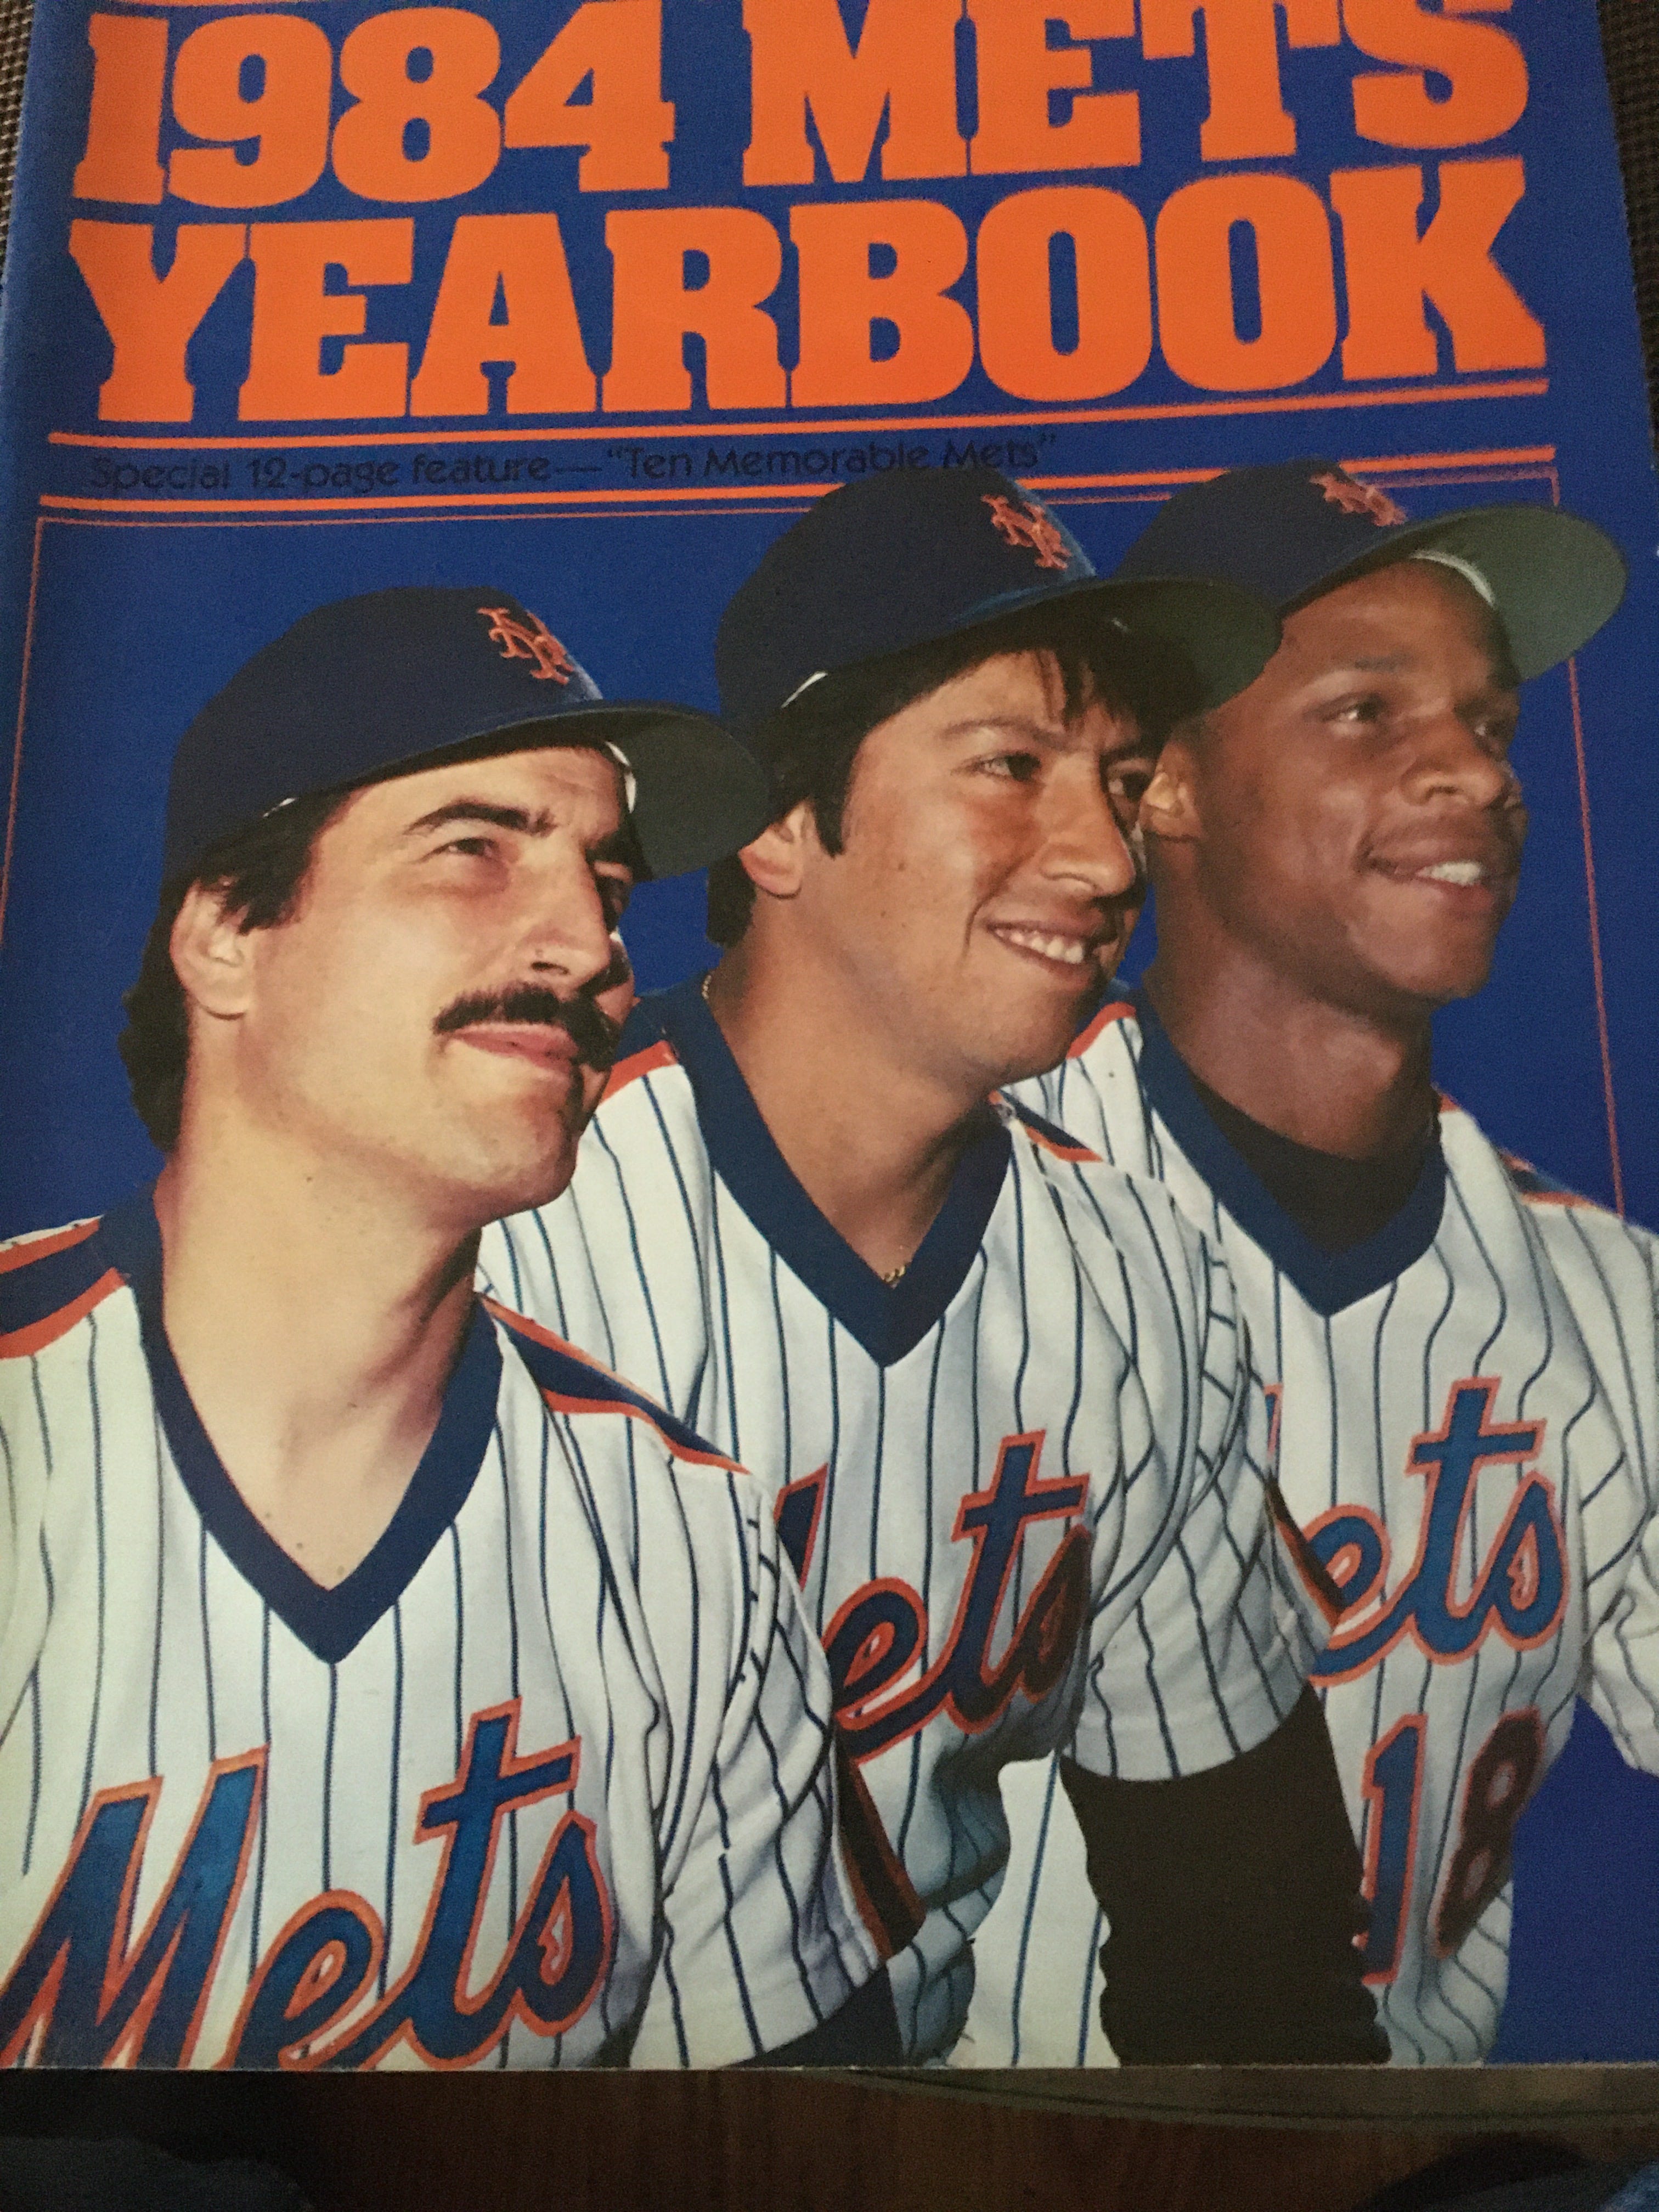 Keith Hernandez's memories of playing with Dwight Gooden & Darryl